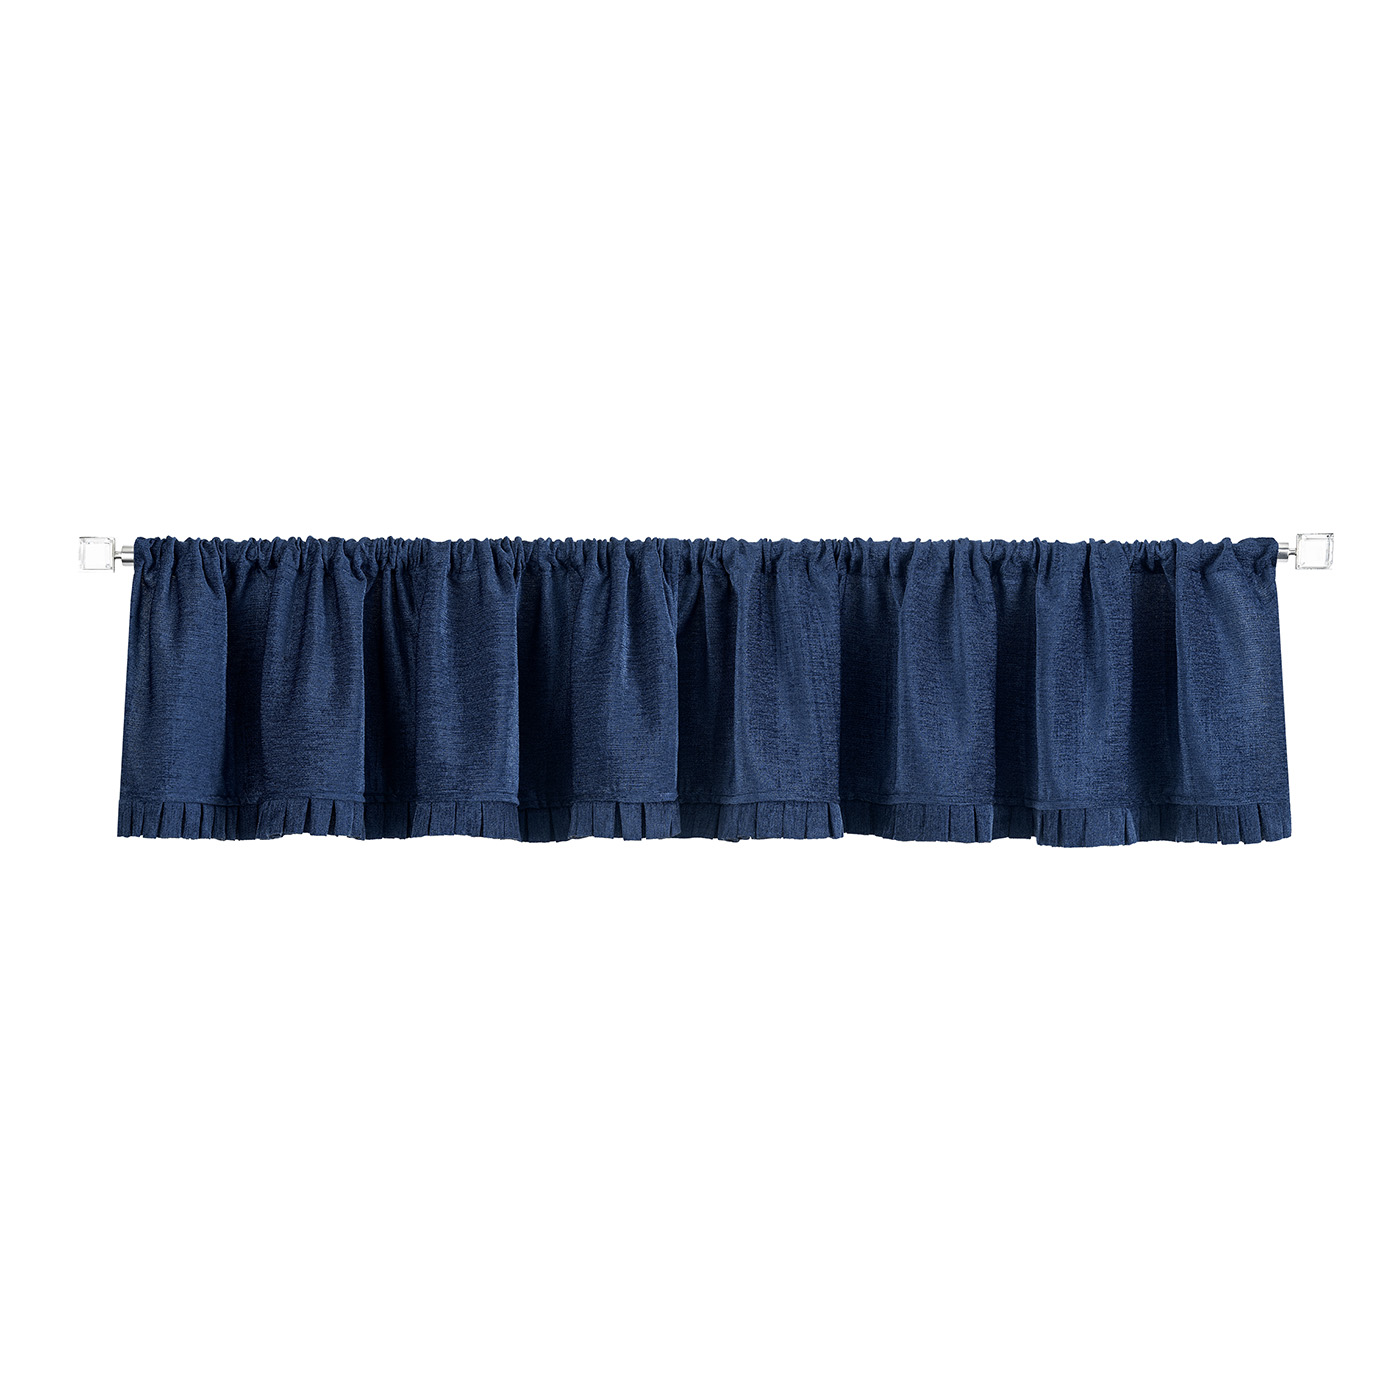 Achim Home Furnishings Bordeaux Solid Pleated Window Curtain Panels - Navy